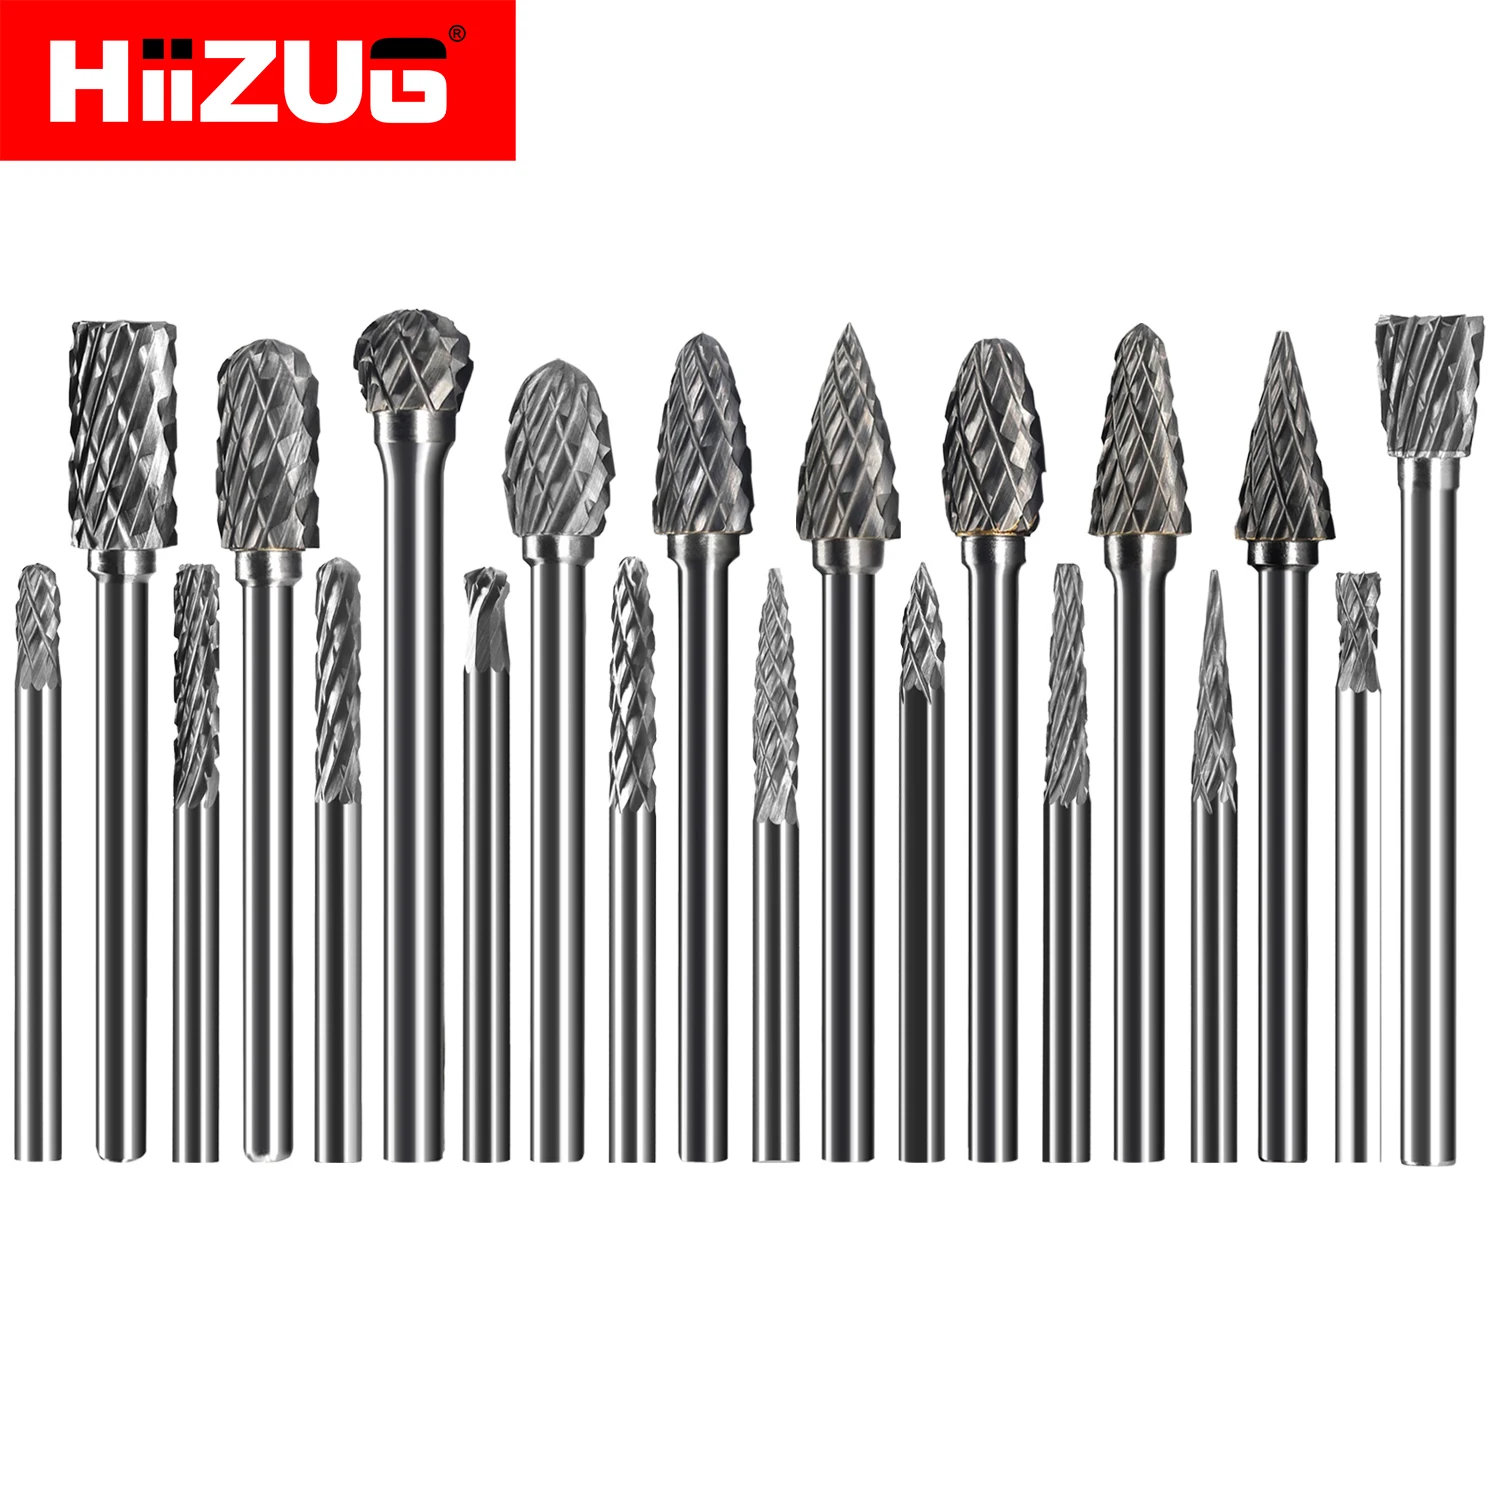 Carbide Die Drill Grinder Rotary Files Mini Burrs Double Cut for Demel Wood Metal Carving Engraving Drilling 1/8 inch Diameter carbide burr awl drill pencil grinder bit rotary file 6mm double cut for metal wood carving engraving sk 1